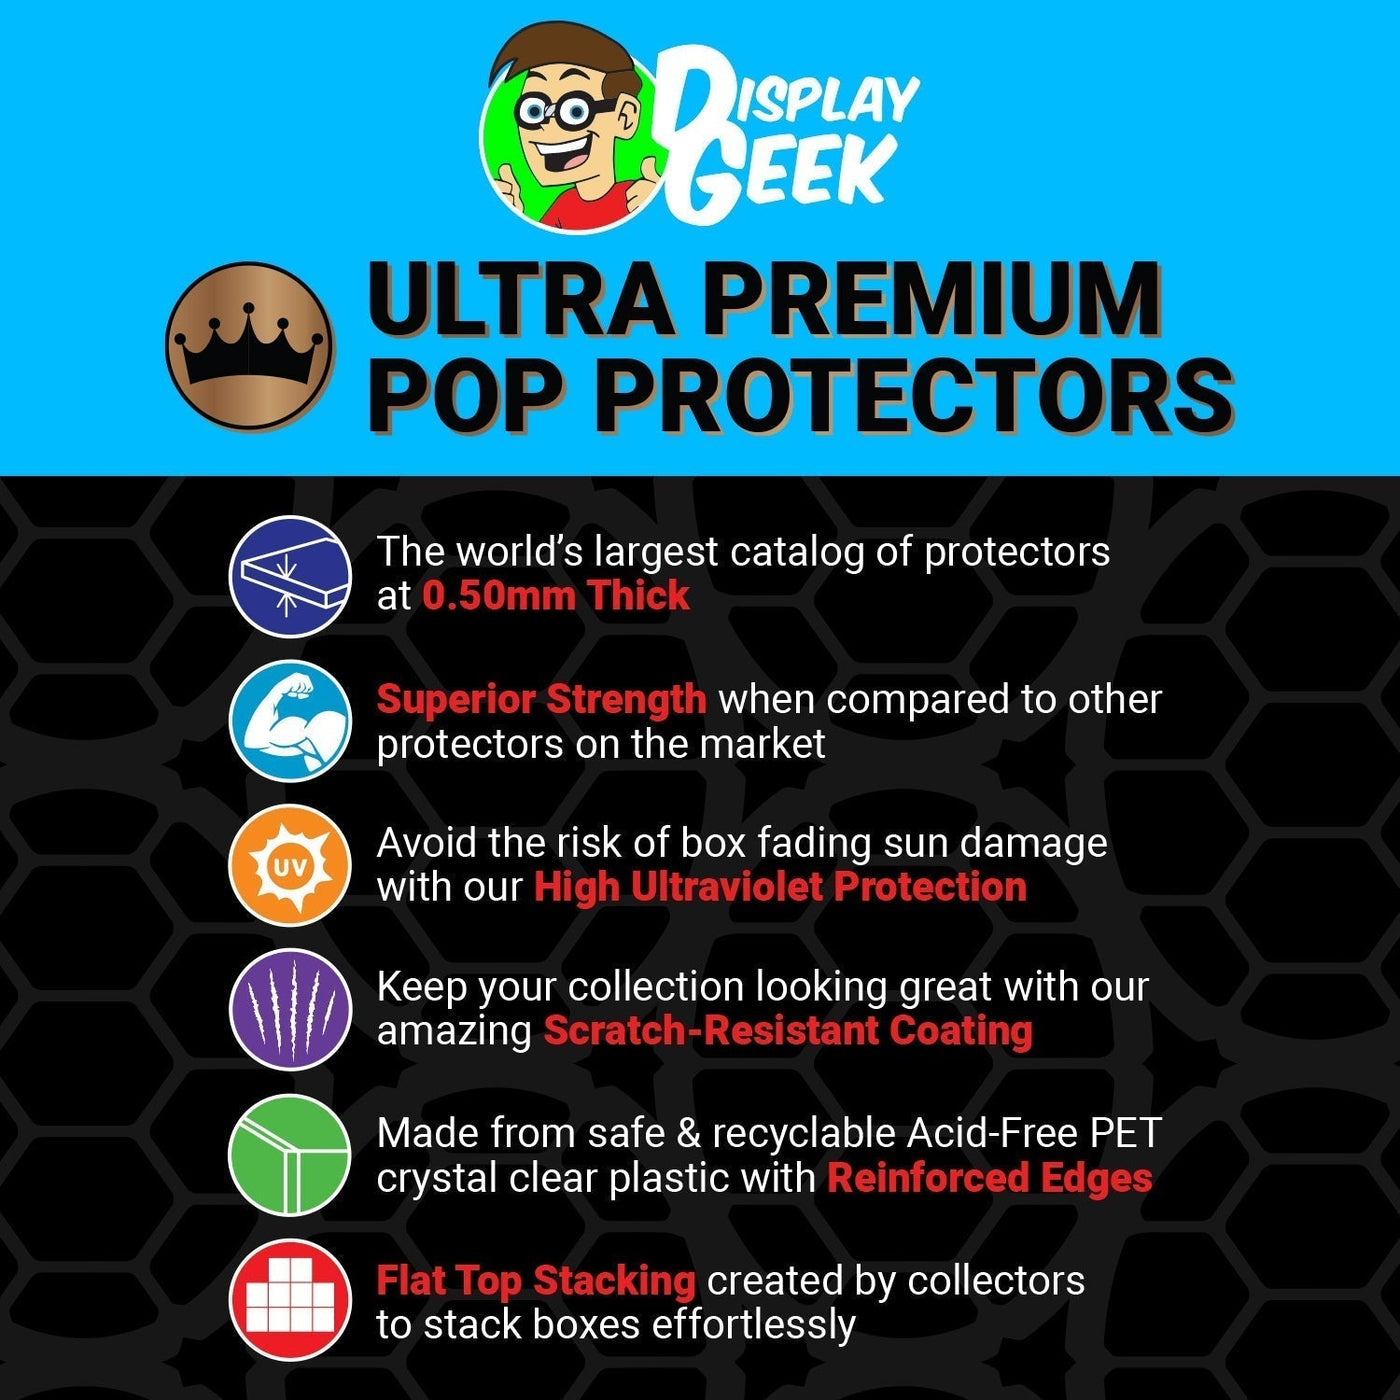 Pop Protector for Maleficent FunkO's Cereal Box on The Protector Guide App by Display Geek